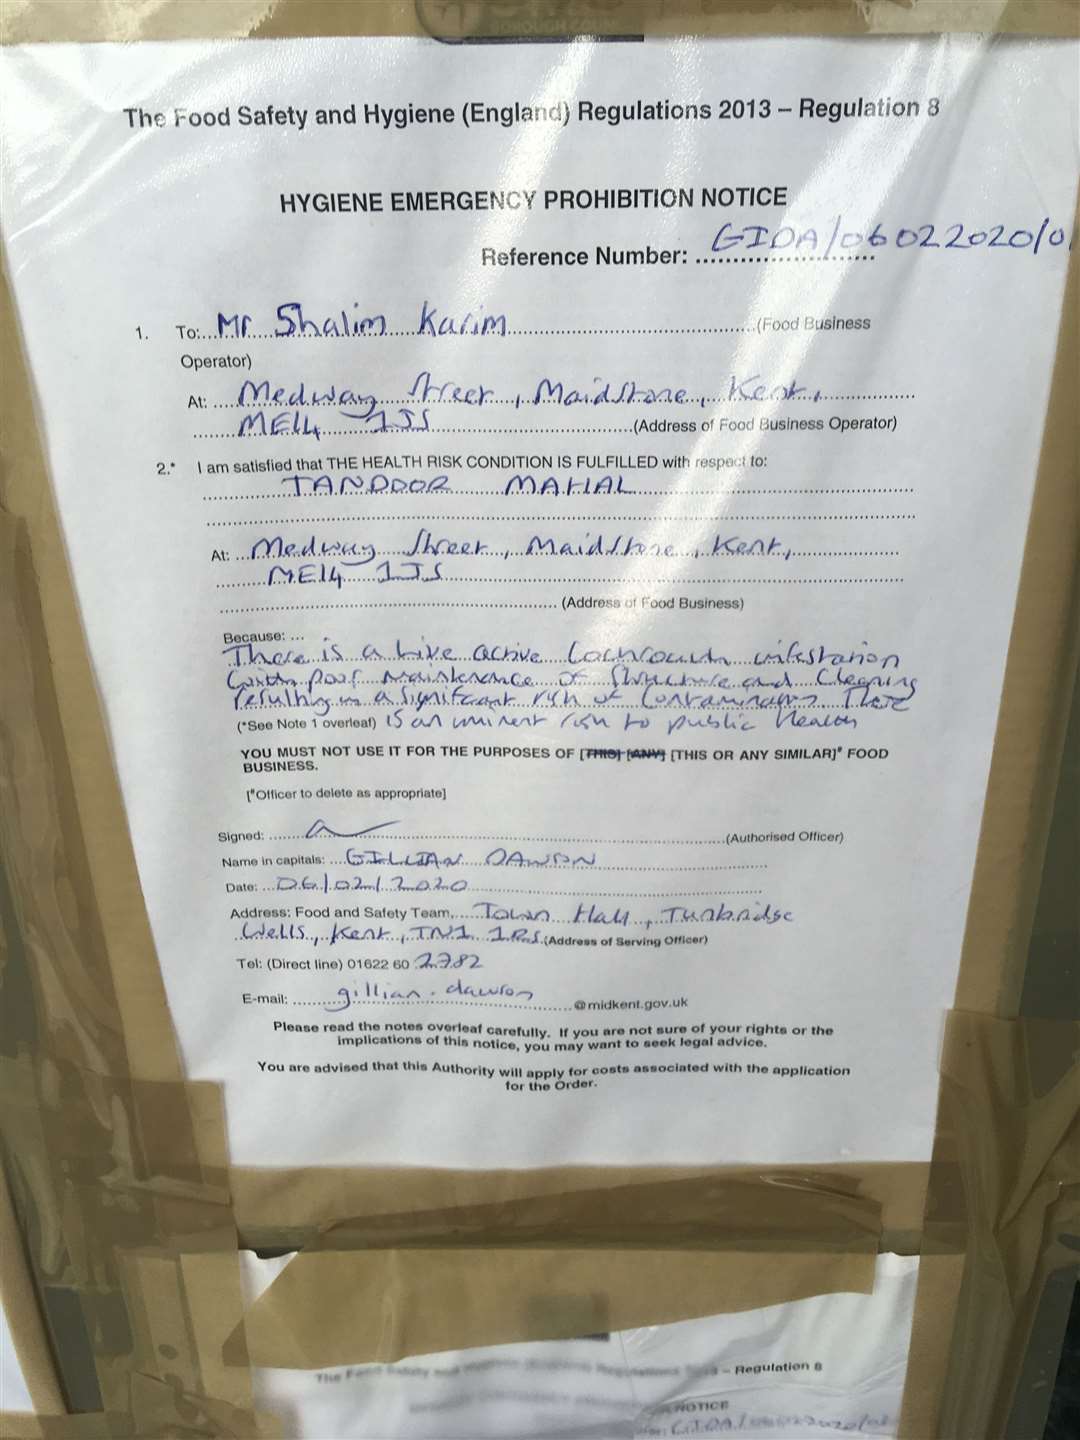 Tandoor Mahal in Medway Street, Maidstone has been served with a hygiene emergency prohibition notice (28926890)